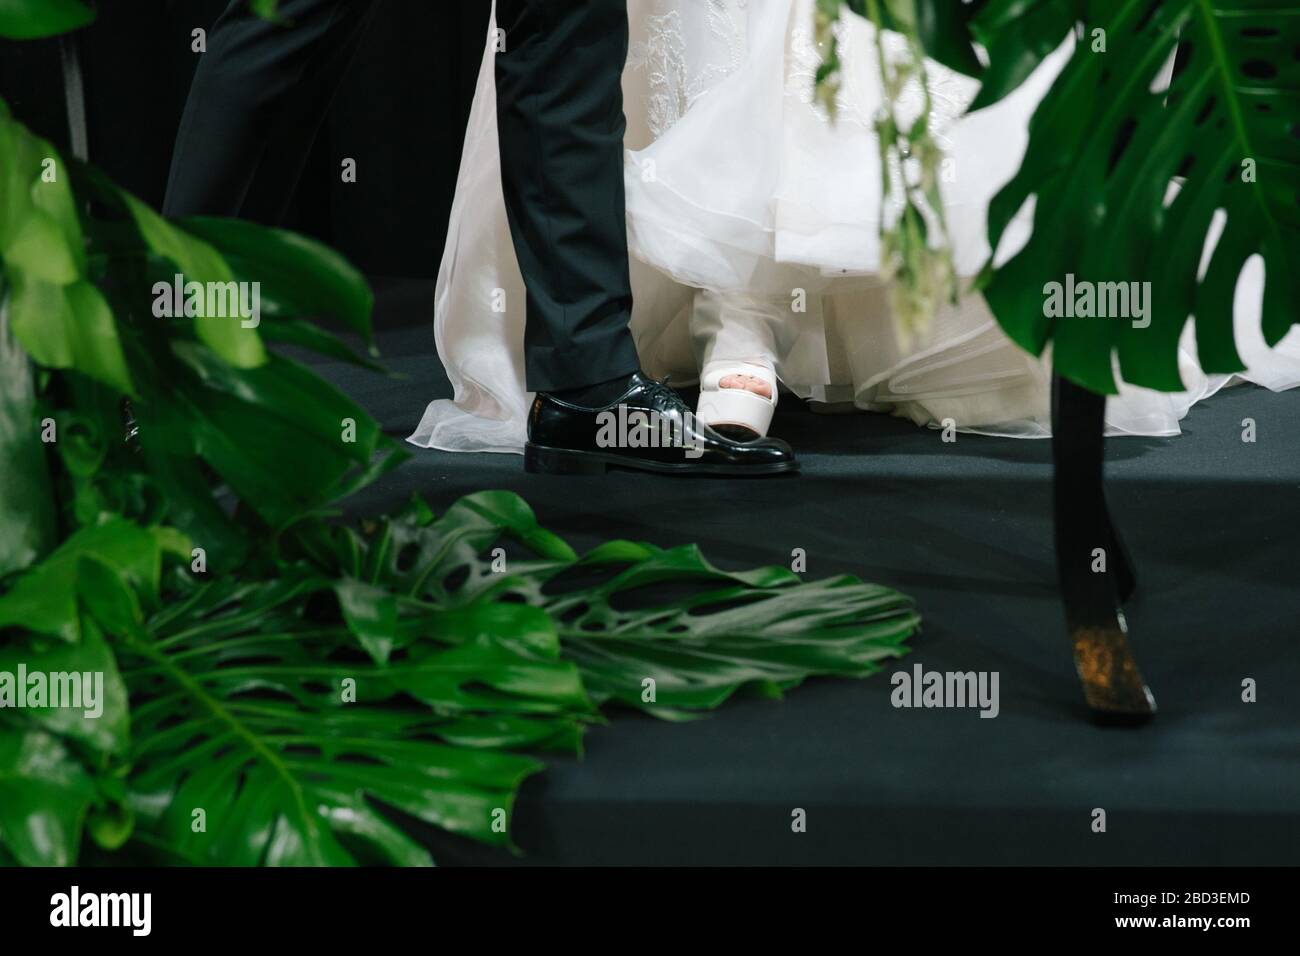 The bride stepped on the groom's feet. Stock Photo